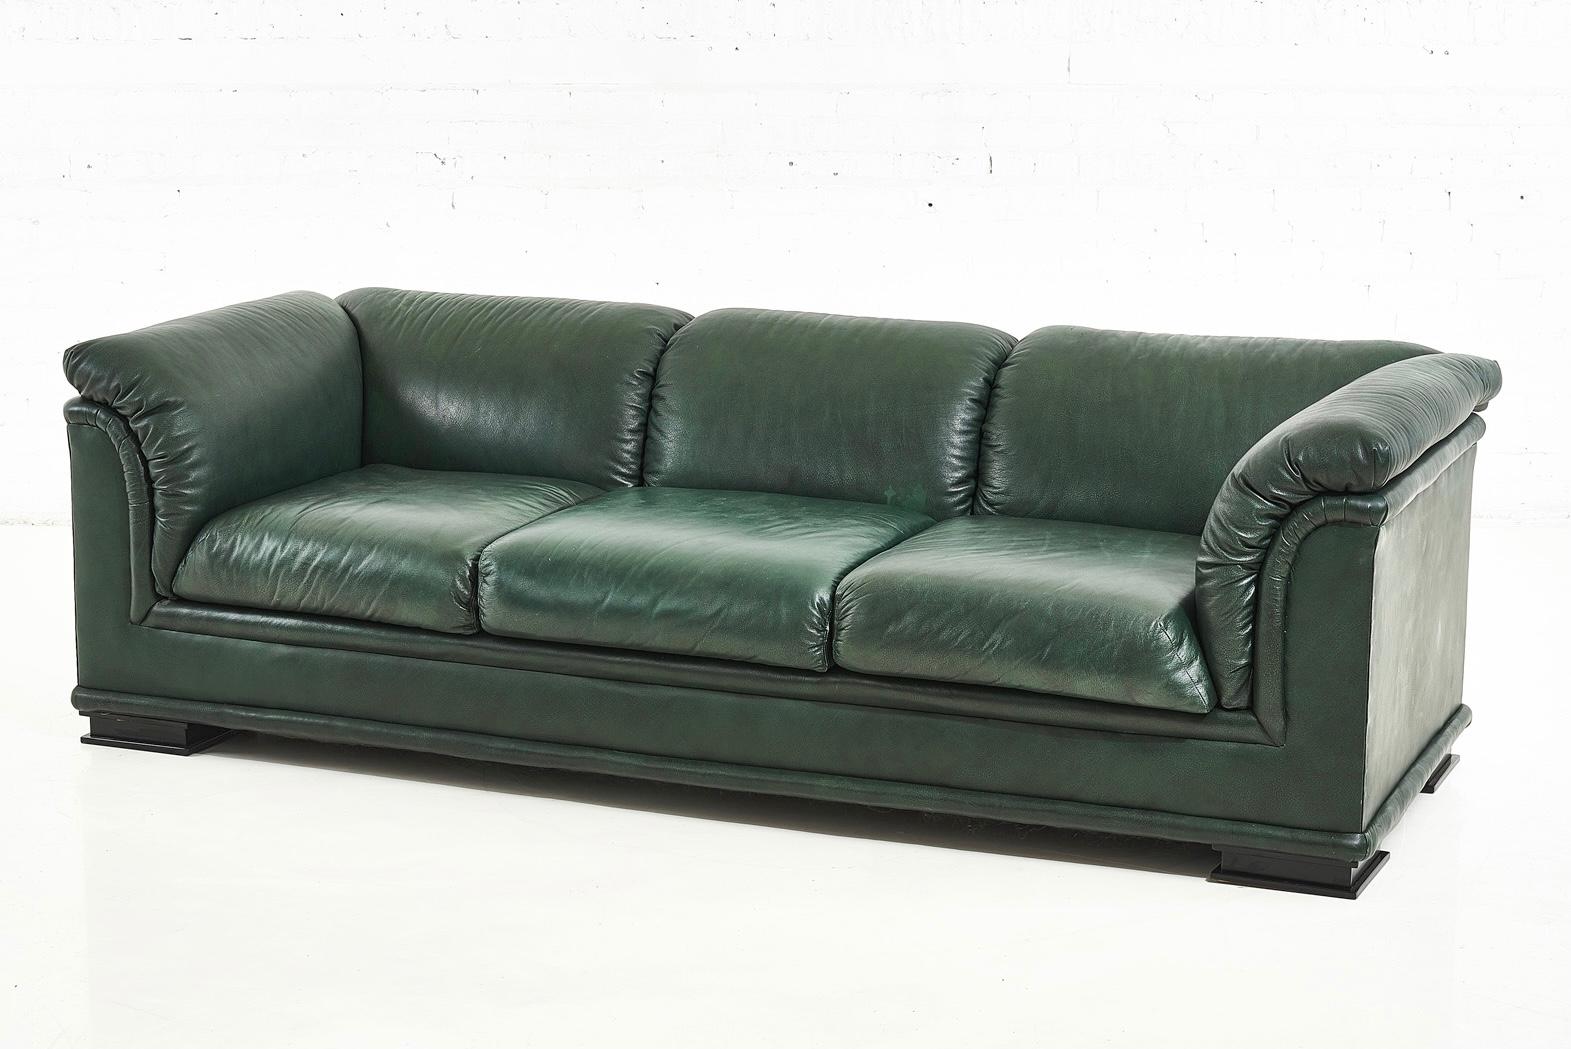 Henredon postmodern green leather sofa, 1980. Chair is listed separately.